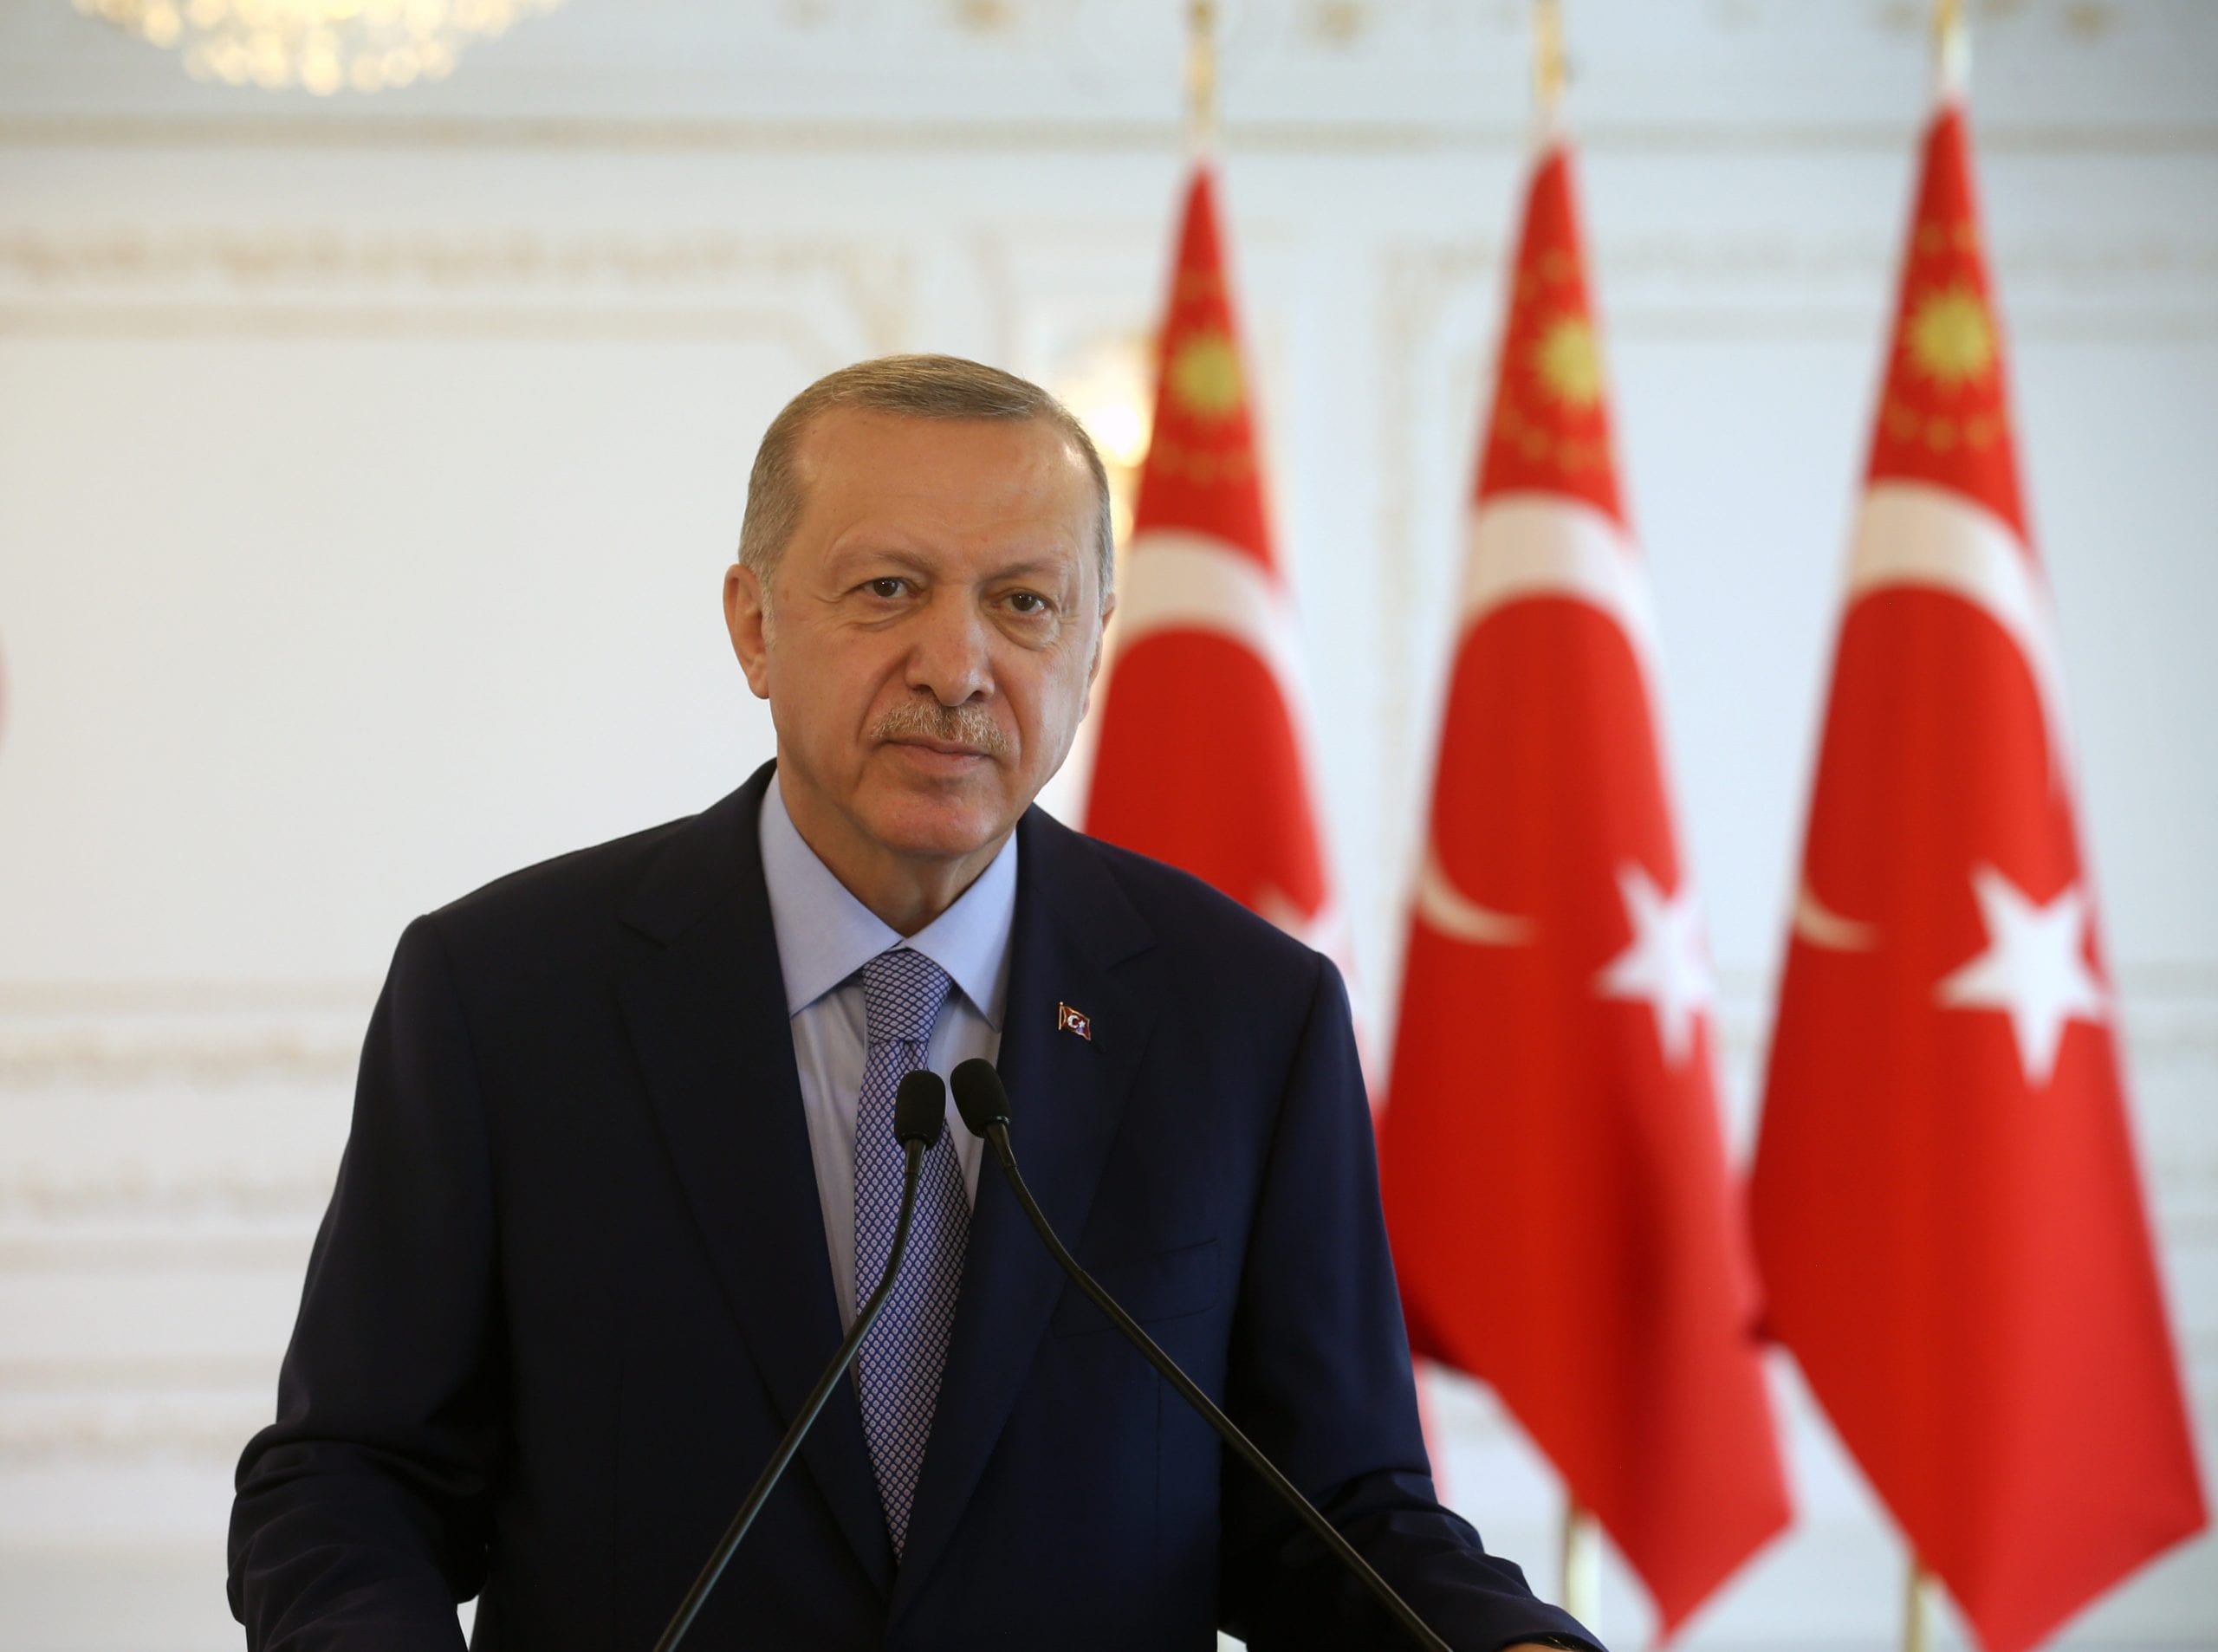 Turkey successfully overcomes pandemic thanks to its healthcare system, Erdoğan says